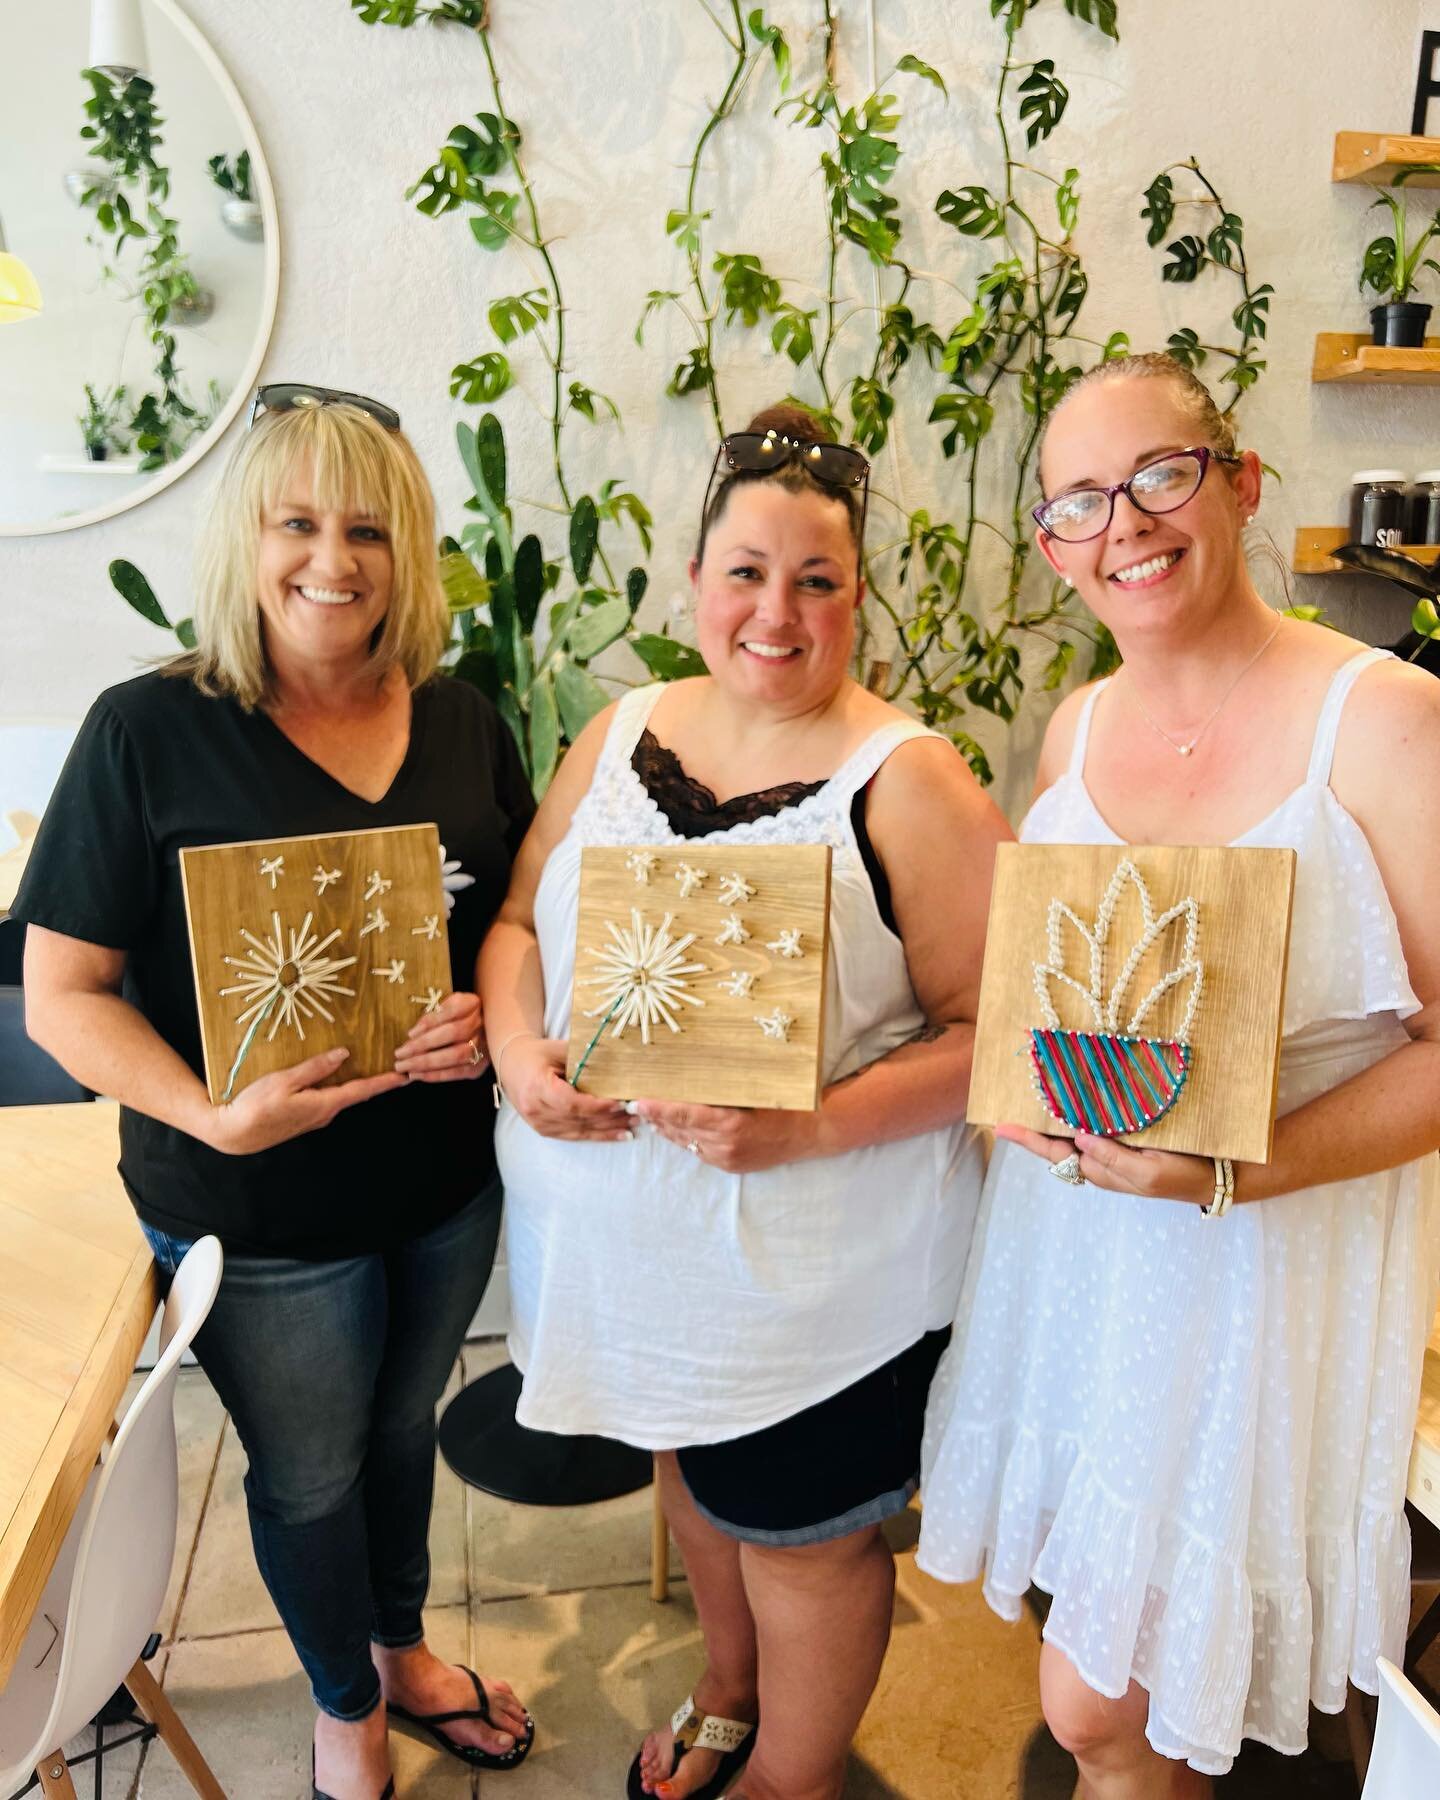 It was a fun morning stringing art and celebrating Erin! Happy Birthday Erin! Thanks for including us in your day! 
.
#meridianidaho #downtownmeridianidaho #treasurevalley #boise #idahomade